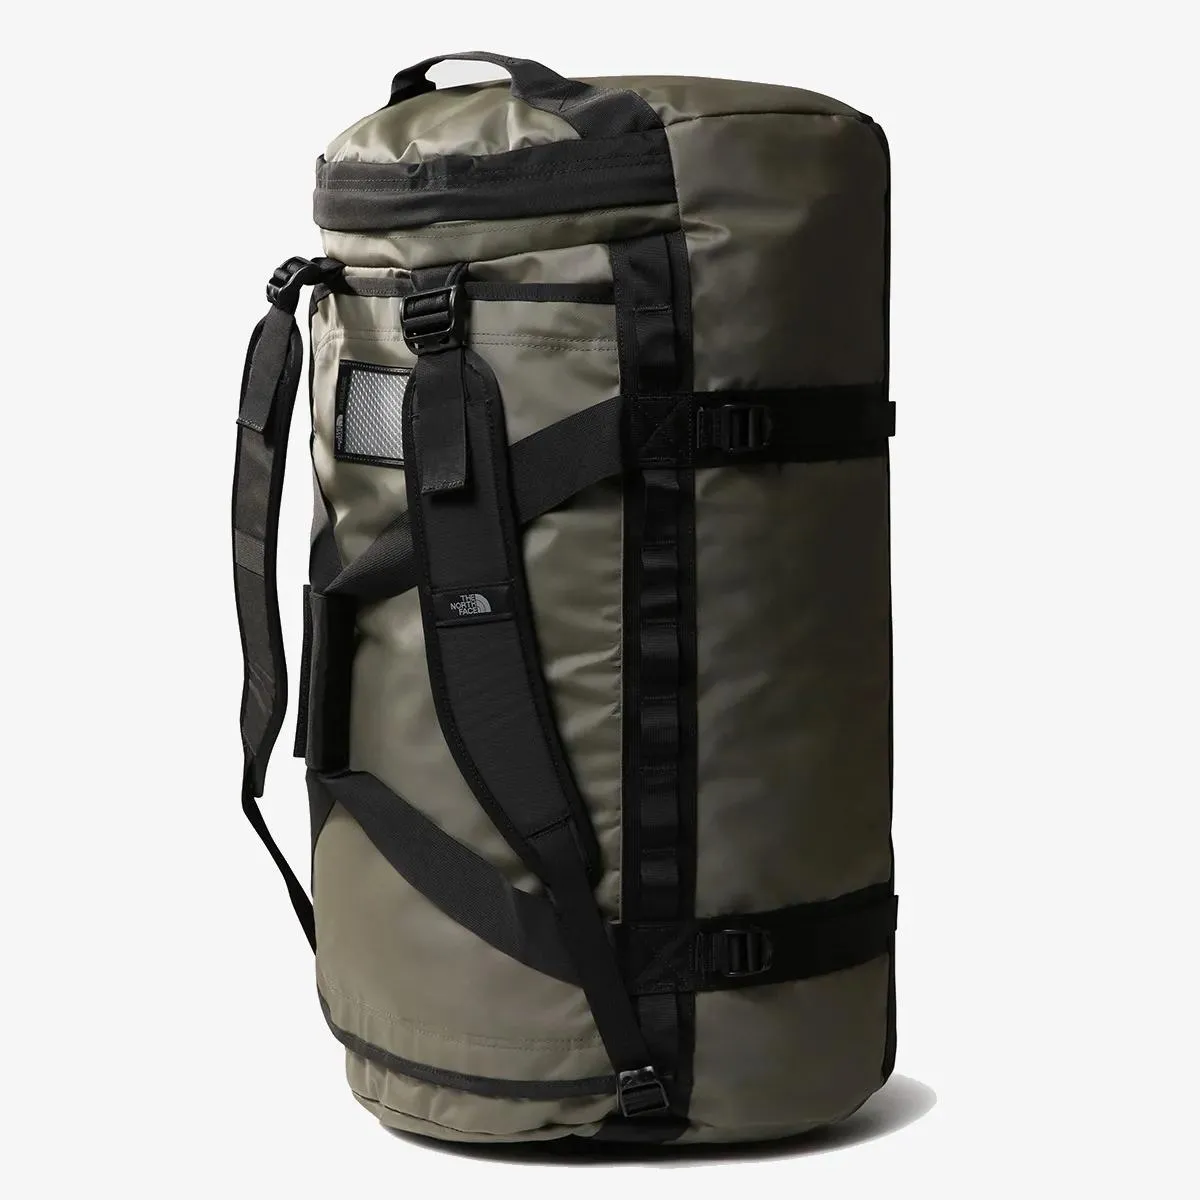 The North Face Torba BASE CAMP DUFFEL 